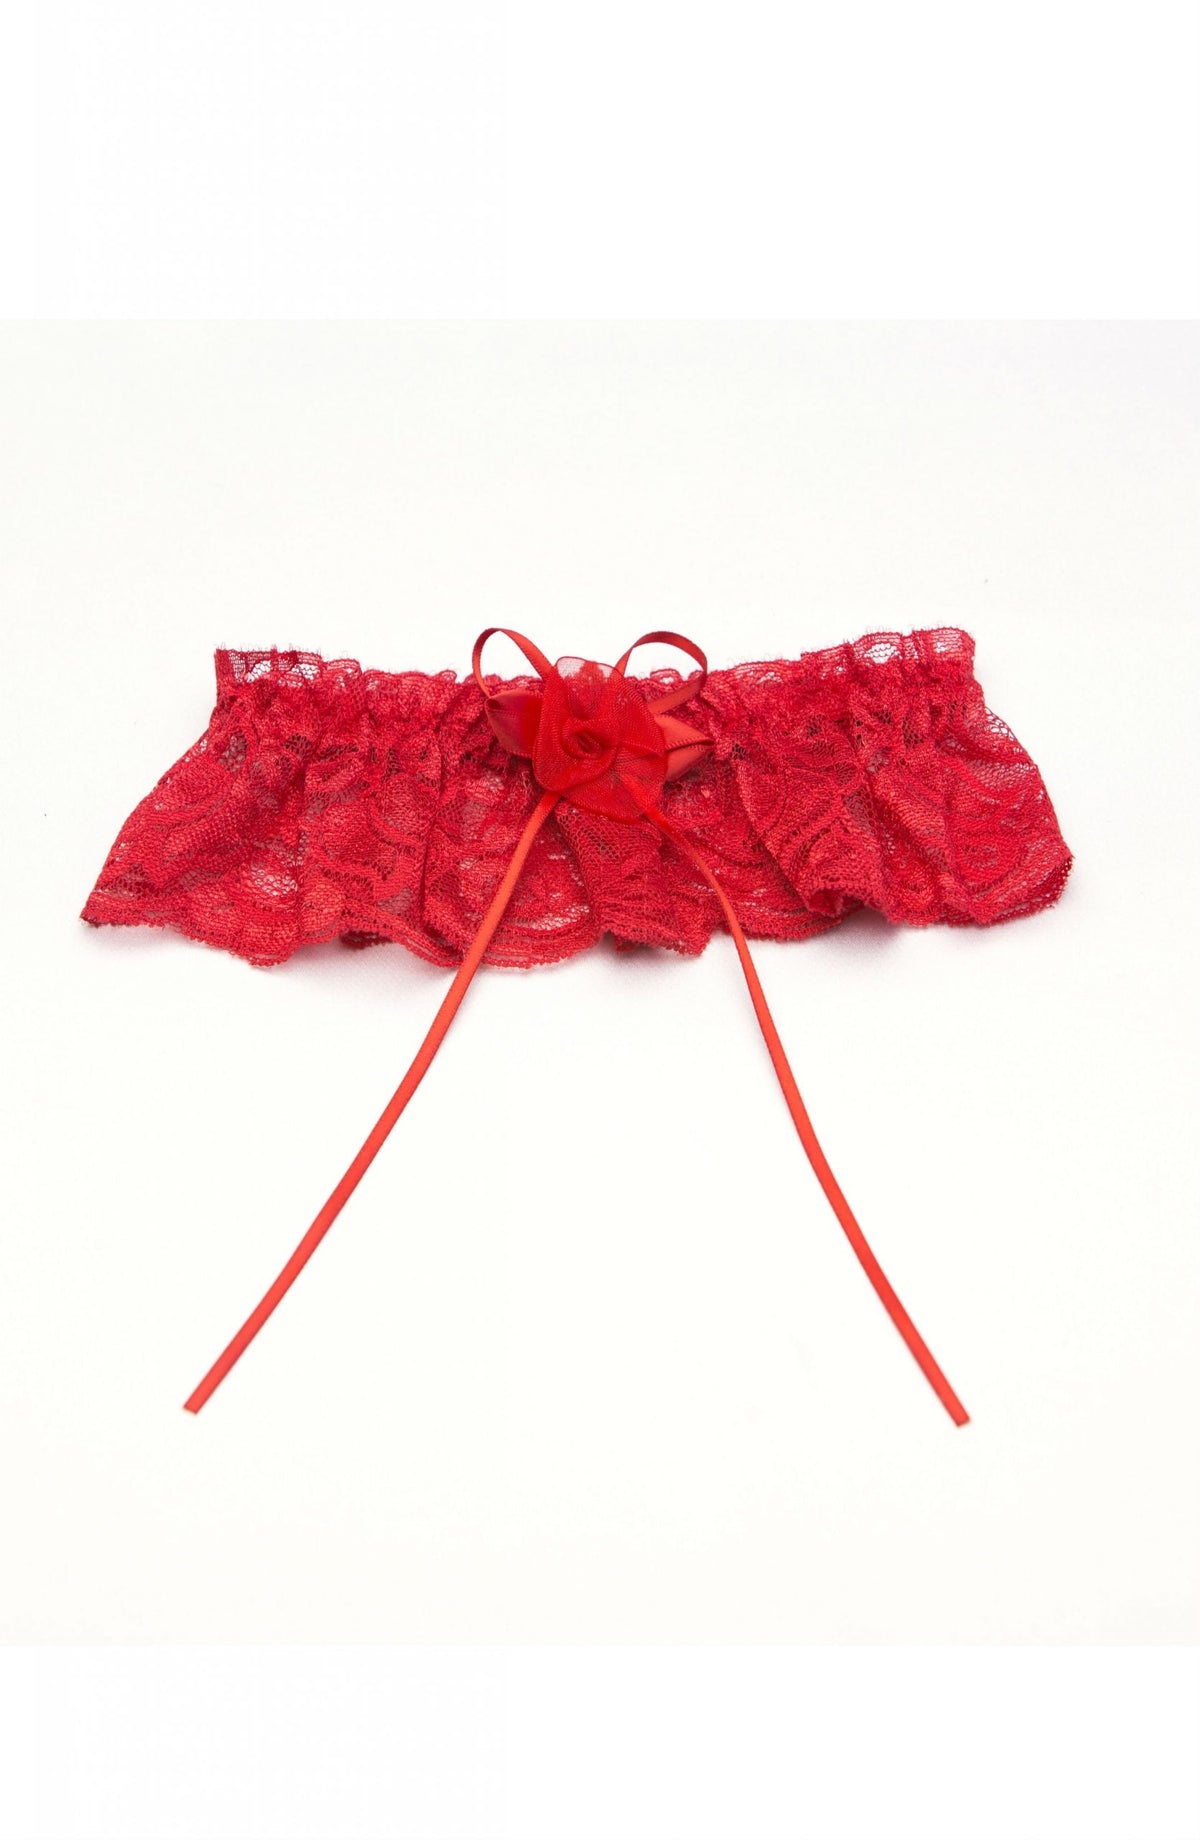 Shirley of Hollywood 18 Garter Red